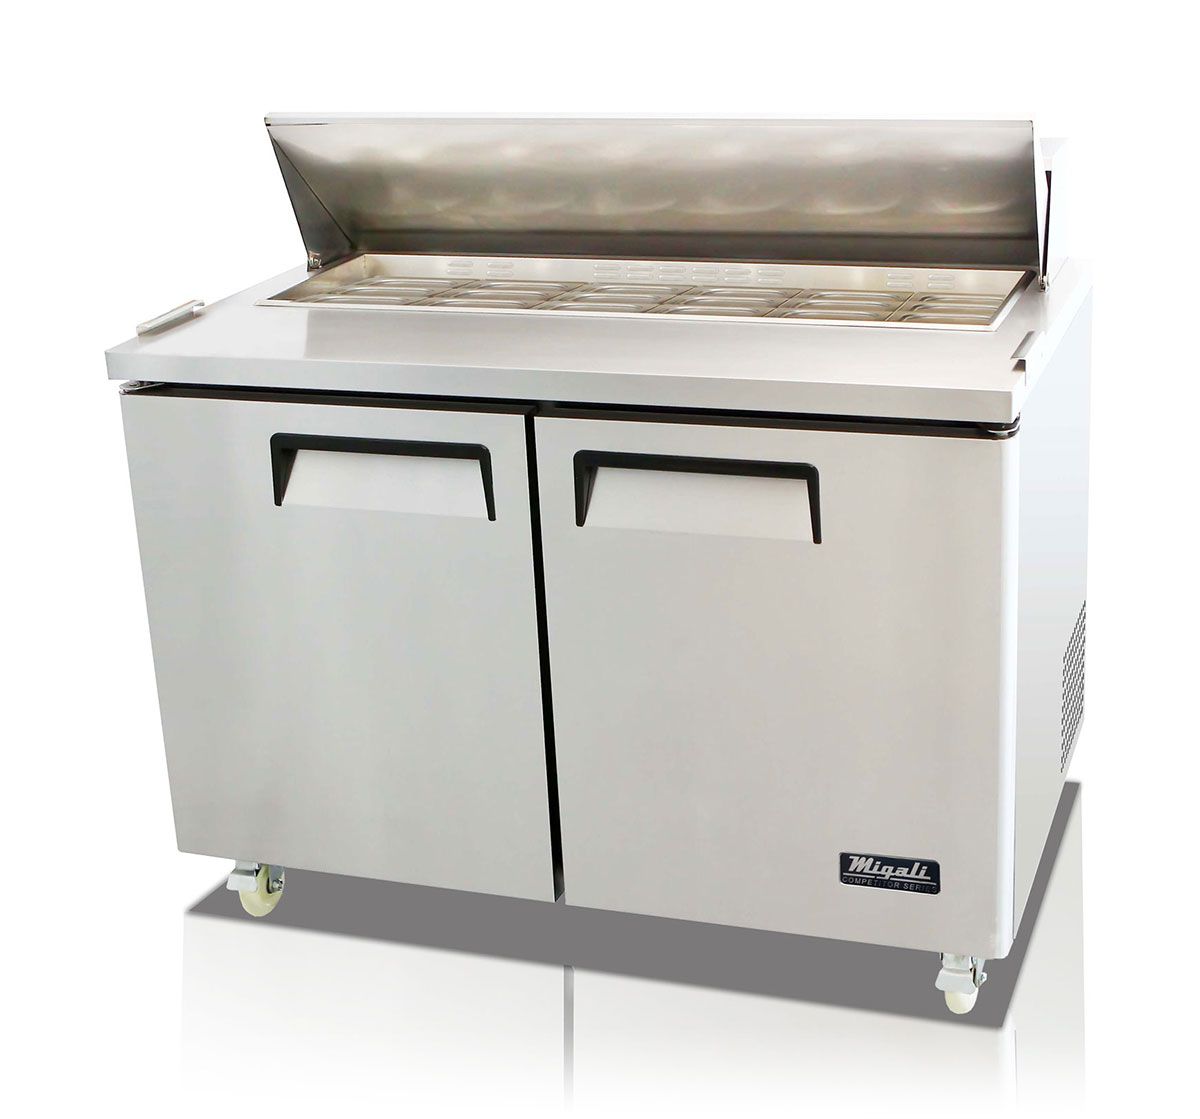 C-sp48-18bt-h 48.2 In. Competitor Series Refrigerated Counter & Big Top Sandwich Preparation Table, Stainless Steel & Galvanized Steel